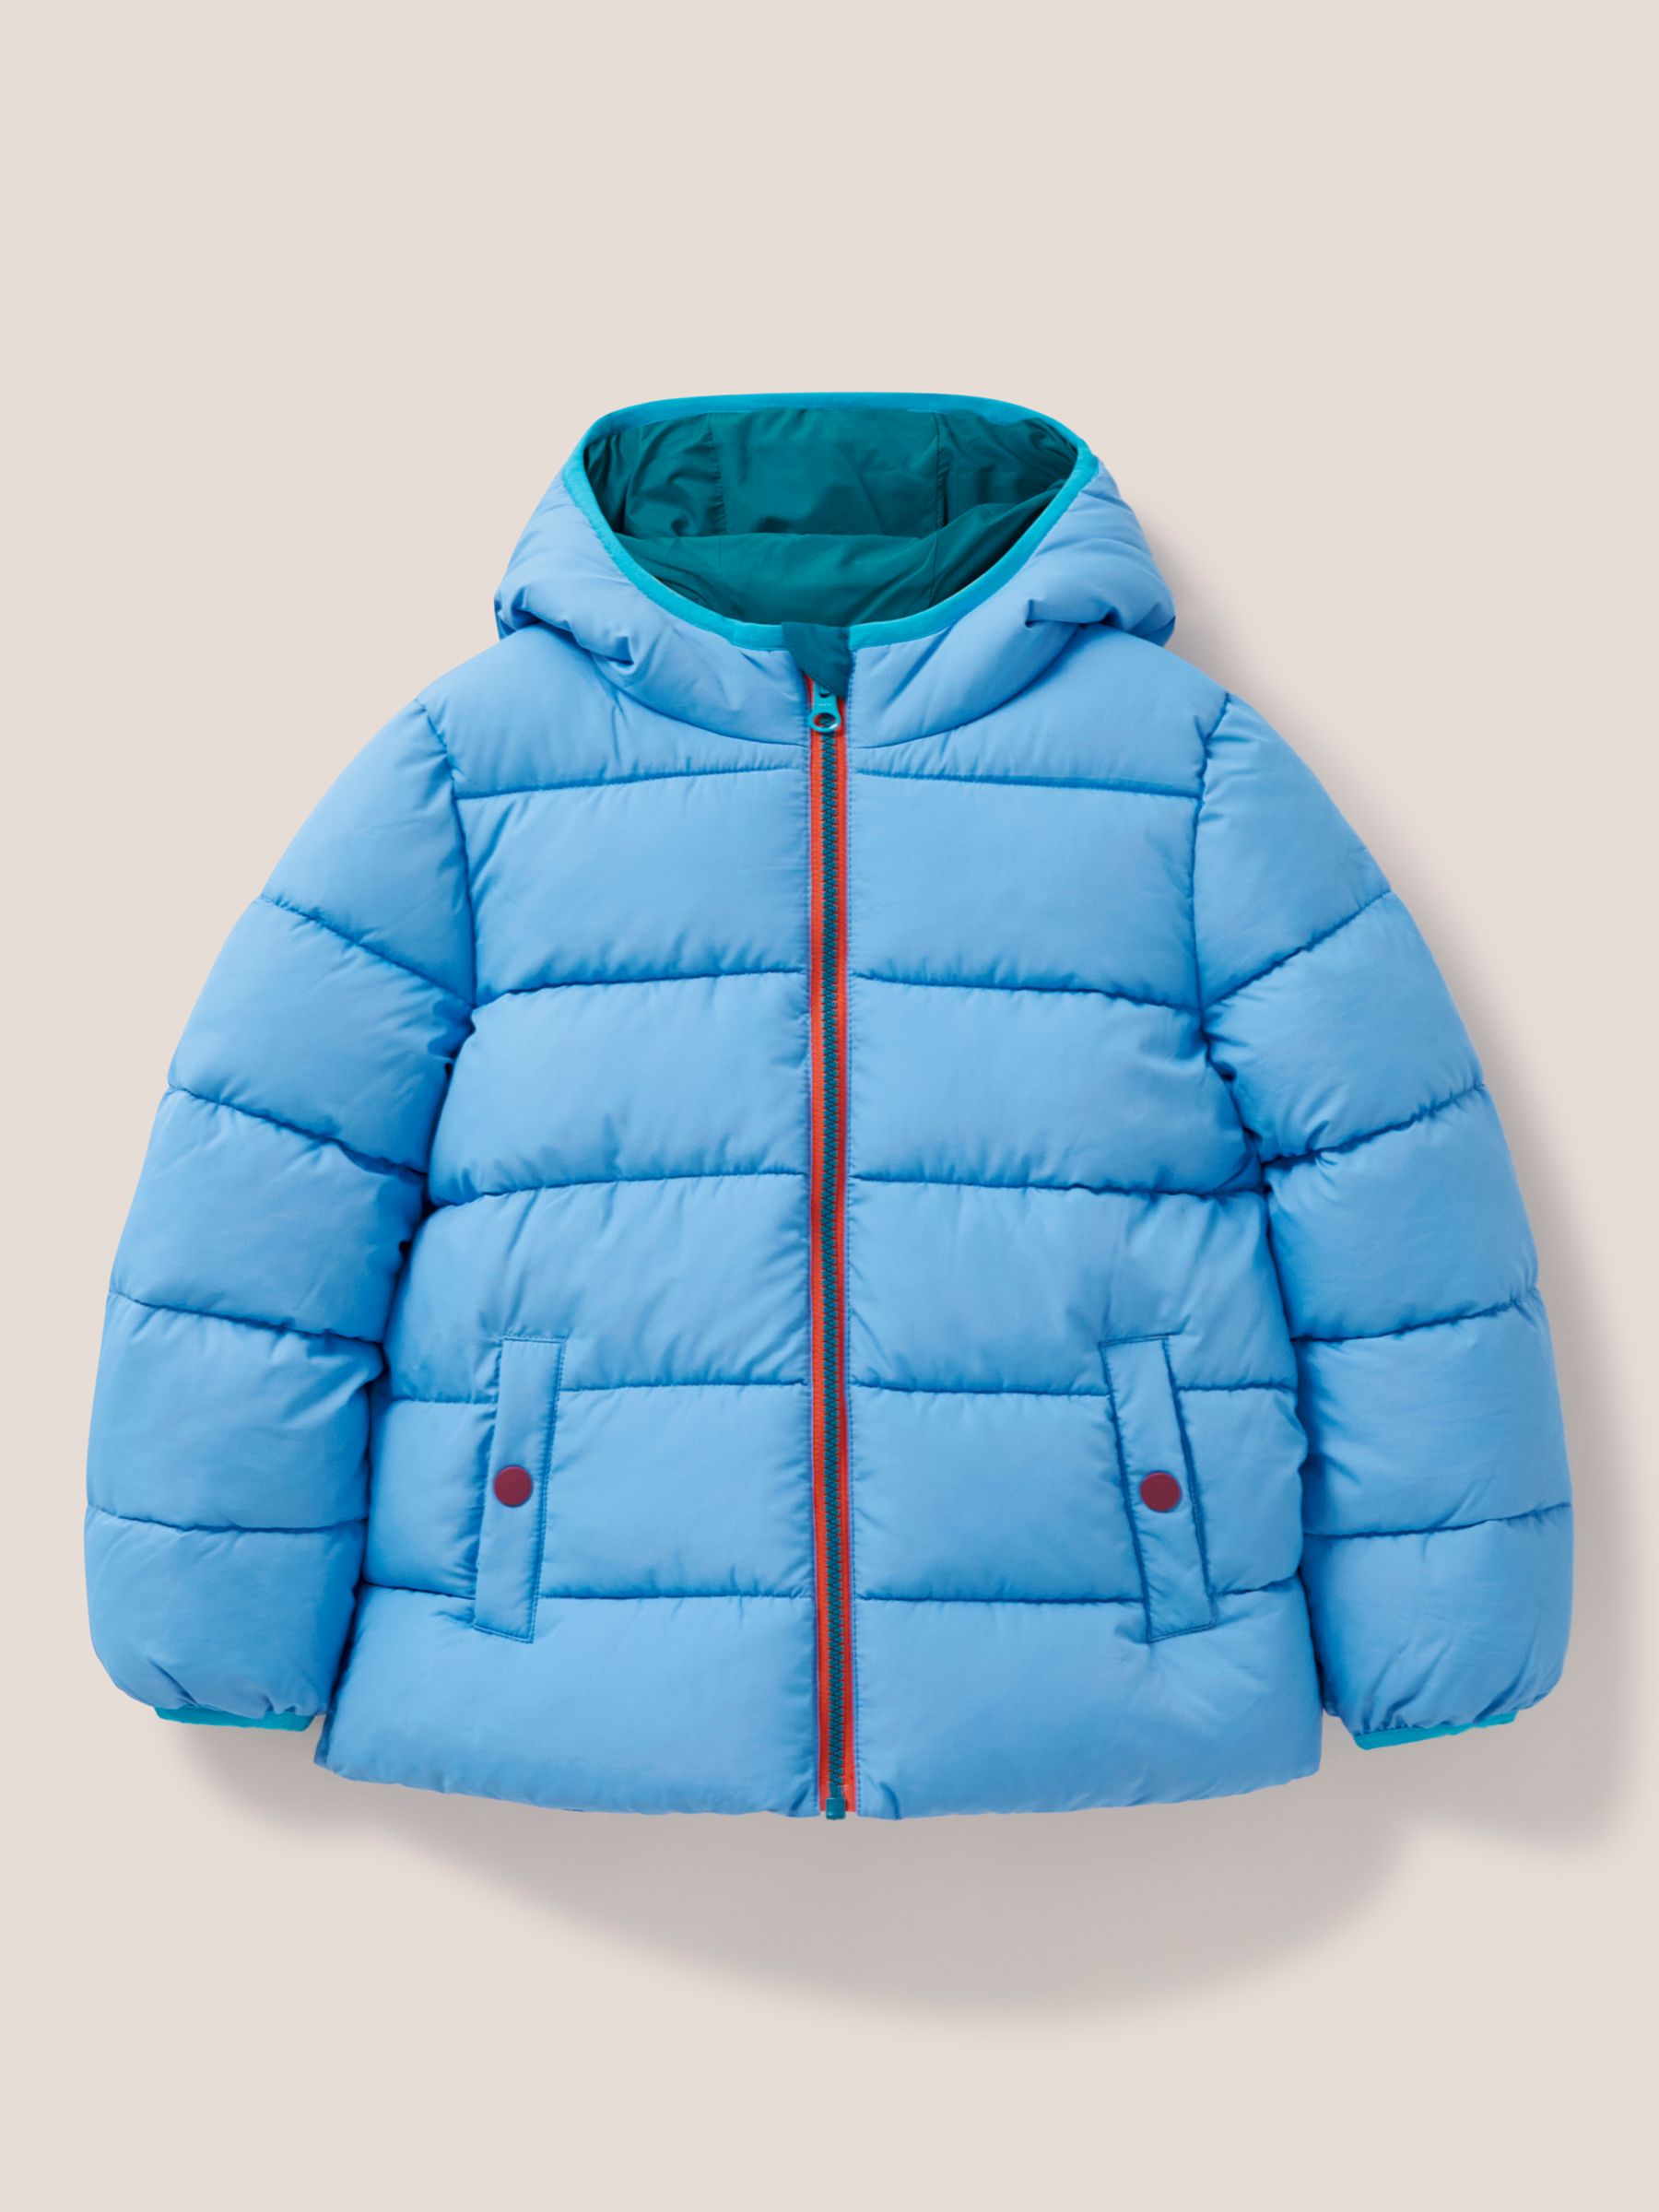 White Stuff Kids' Quilted Puffer Hooded Jacket, Bright Teal at John ...